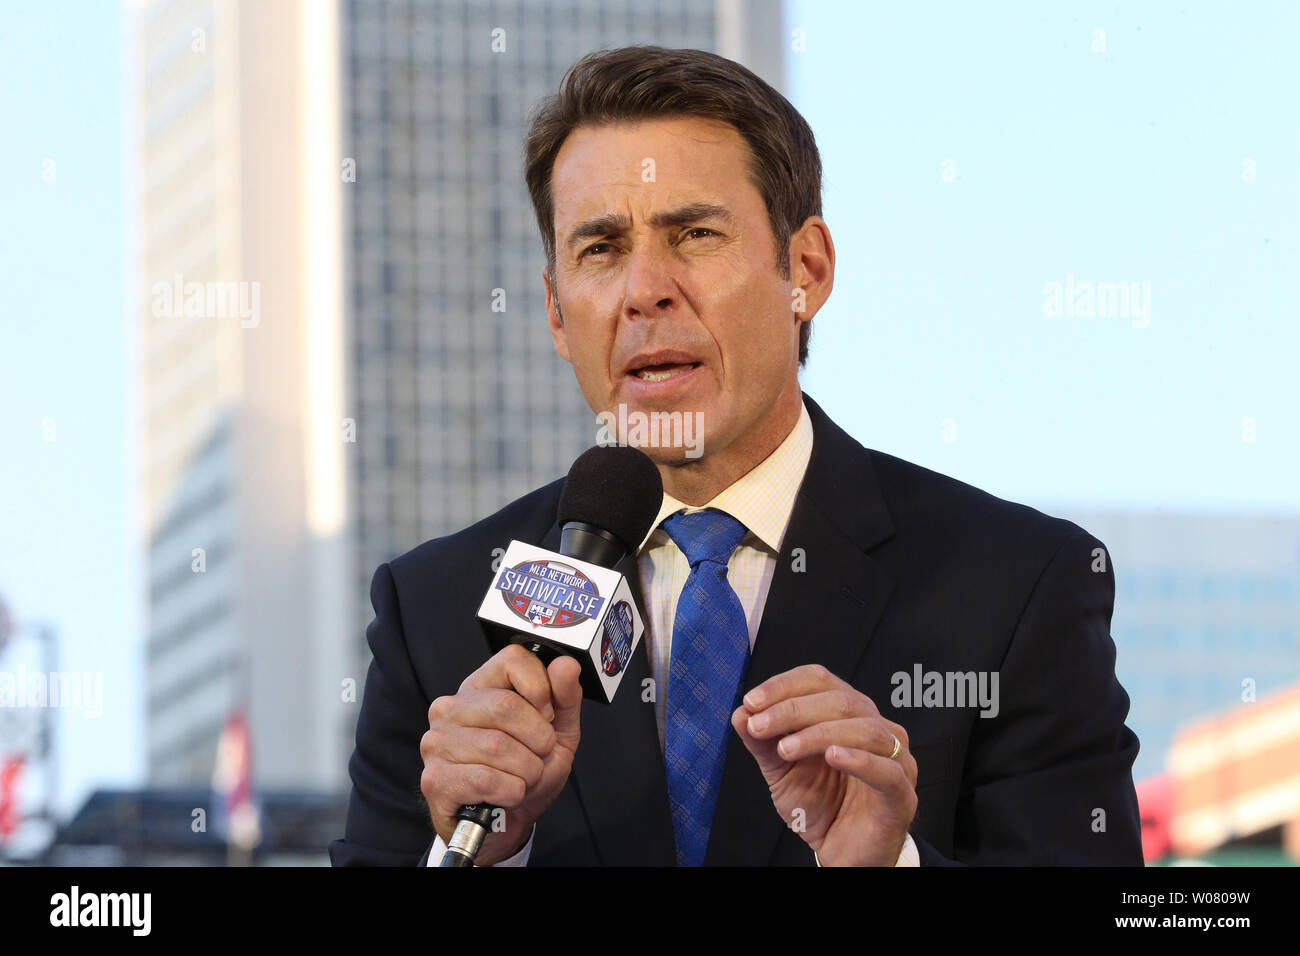 MLB broadcaster Tom Verducci gives a preview of the Boston Red Sox - St. Louis Cardinals baseball game from at Busch Stadium in St. Louis on May 16, 2017.Verducci also serves as a senior baseball writer for Sports Illustrated magazine.  Photo by Bill Greenblatt/UPI Stock Photo